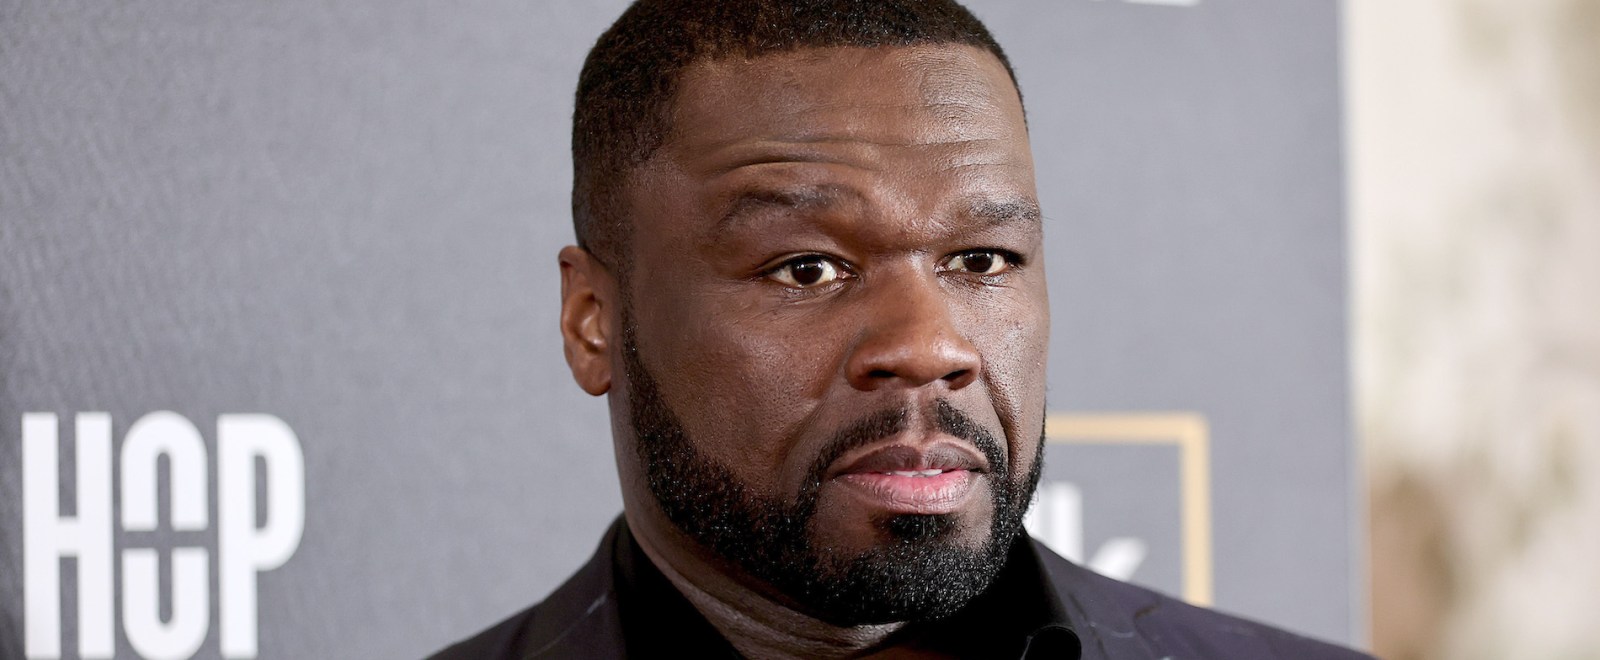 50 Cent's G-Unit Shoes Nearly Sold As Many As Air Jordan